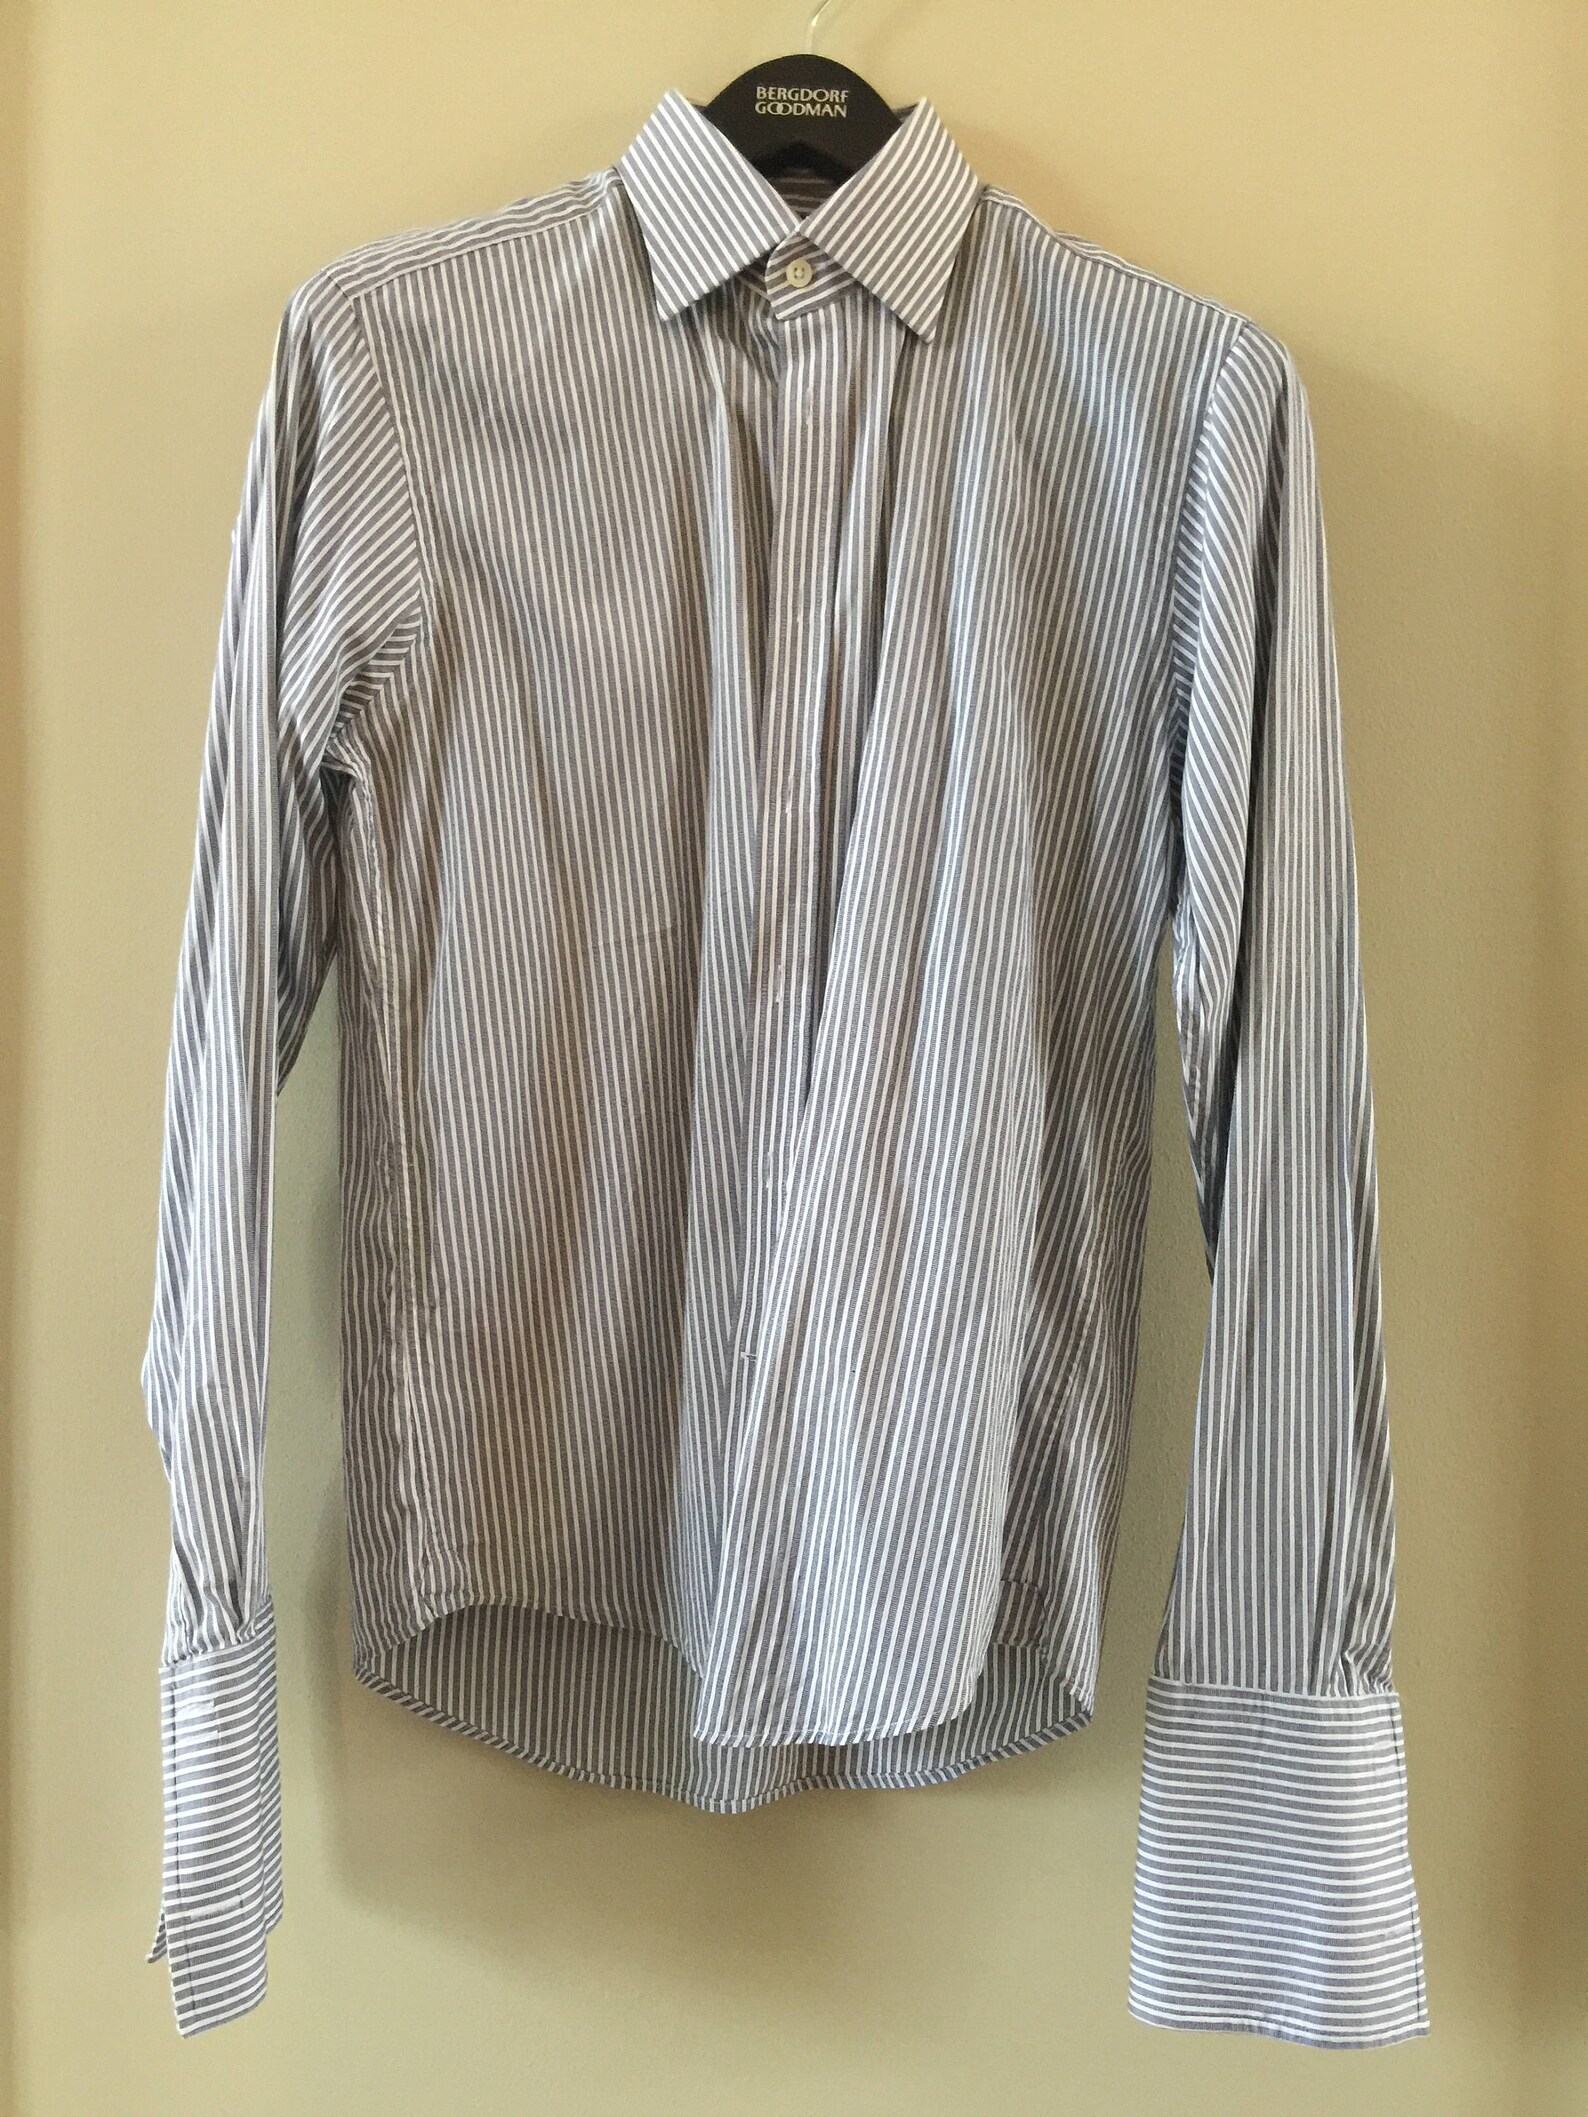 CHARLES TYRWHITT Men's Shirt With Double Cuffs - Etsy Norway